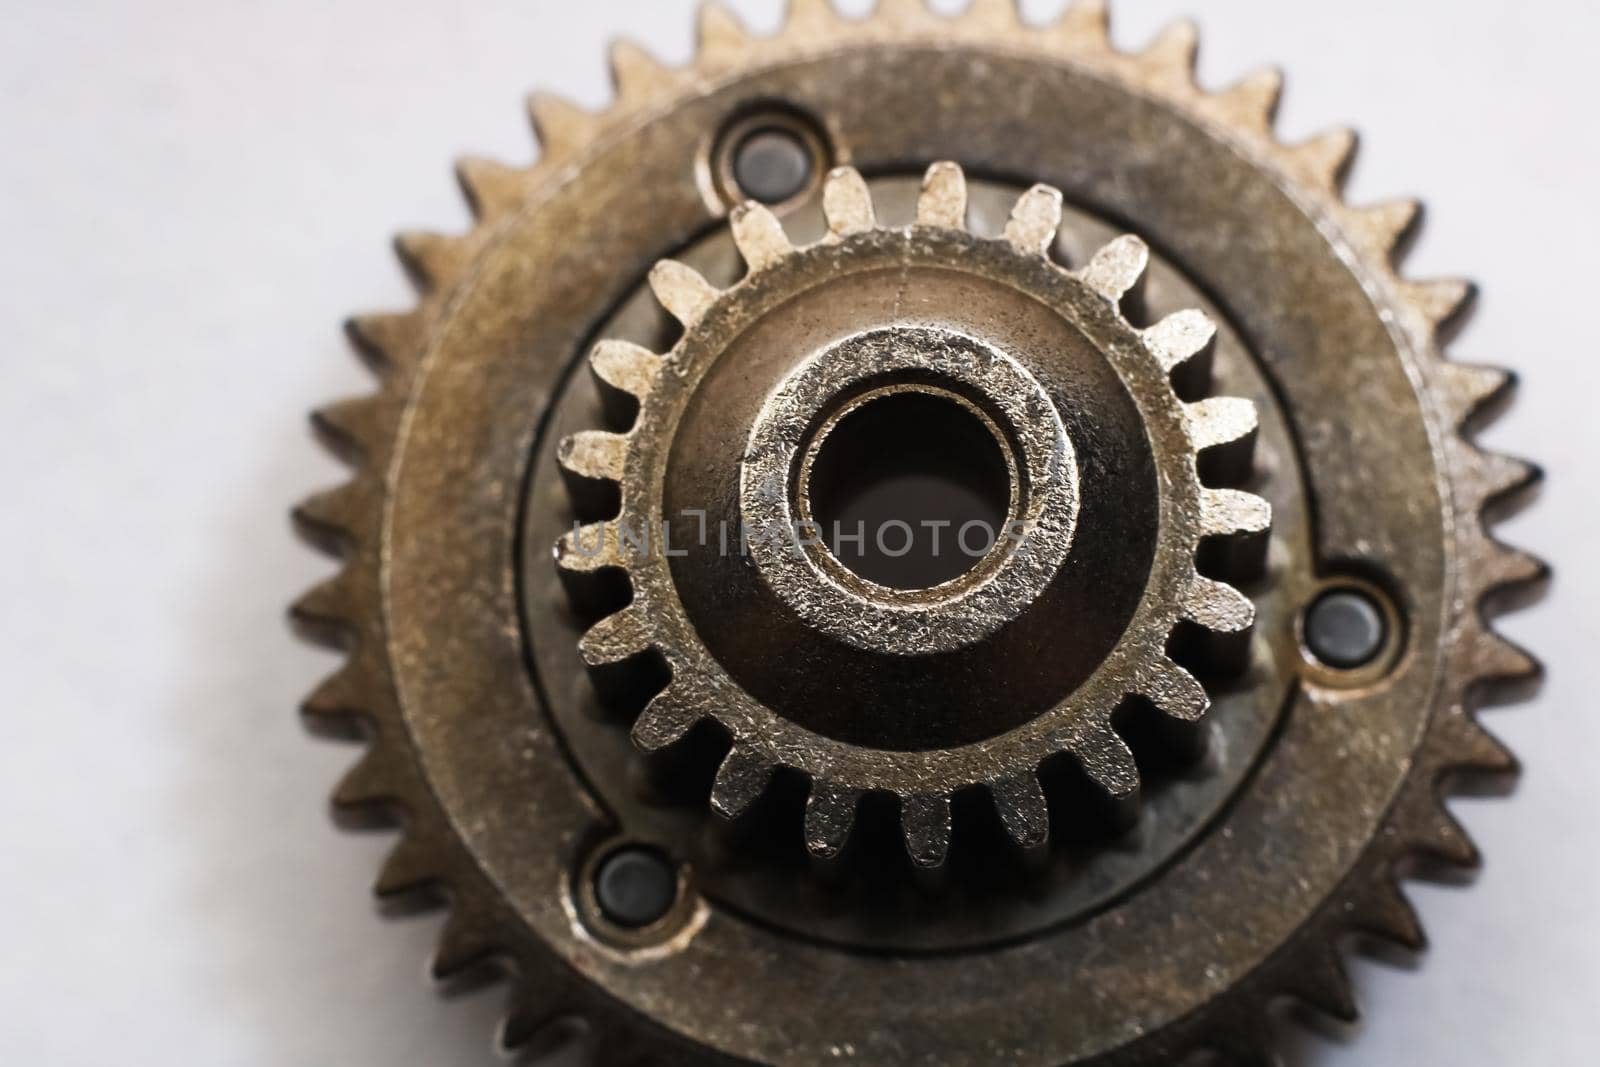 Gear close up on a gray background by Vera1703